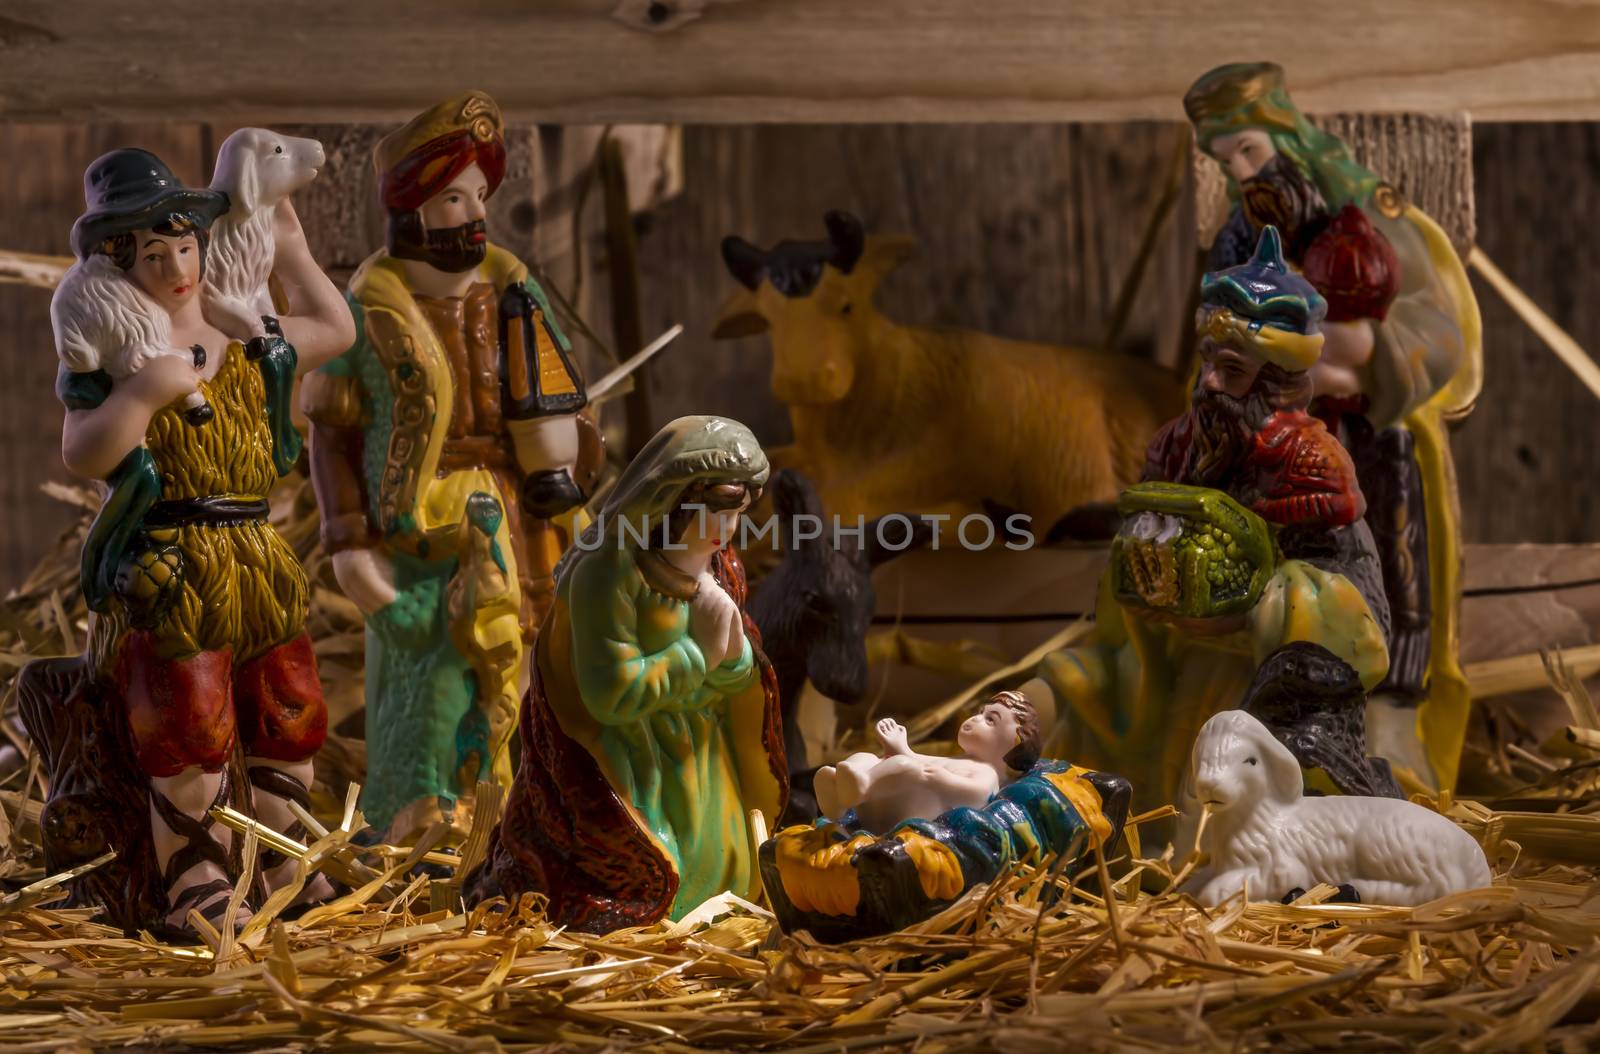 nativity scene with hand-colored figures made out of wood. Focus on  Mary!